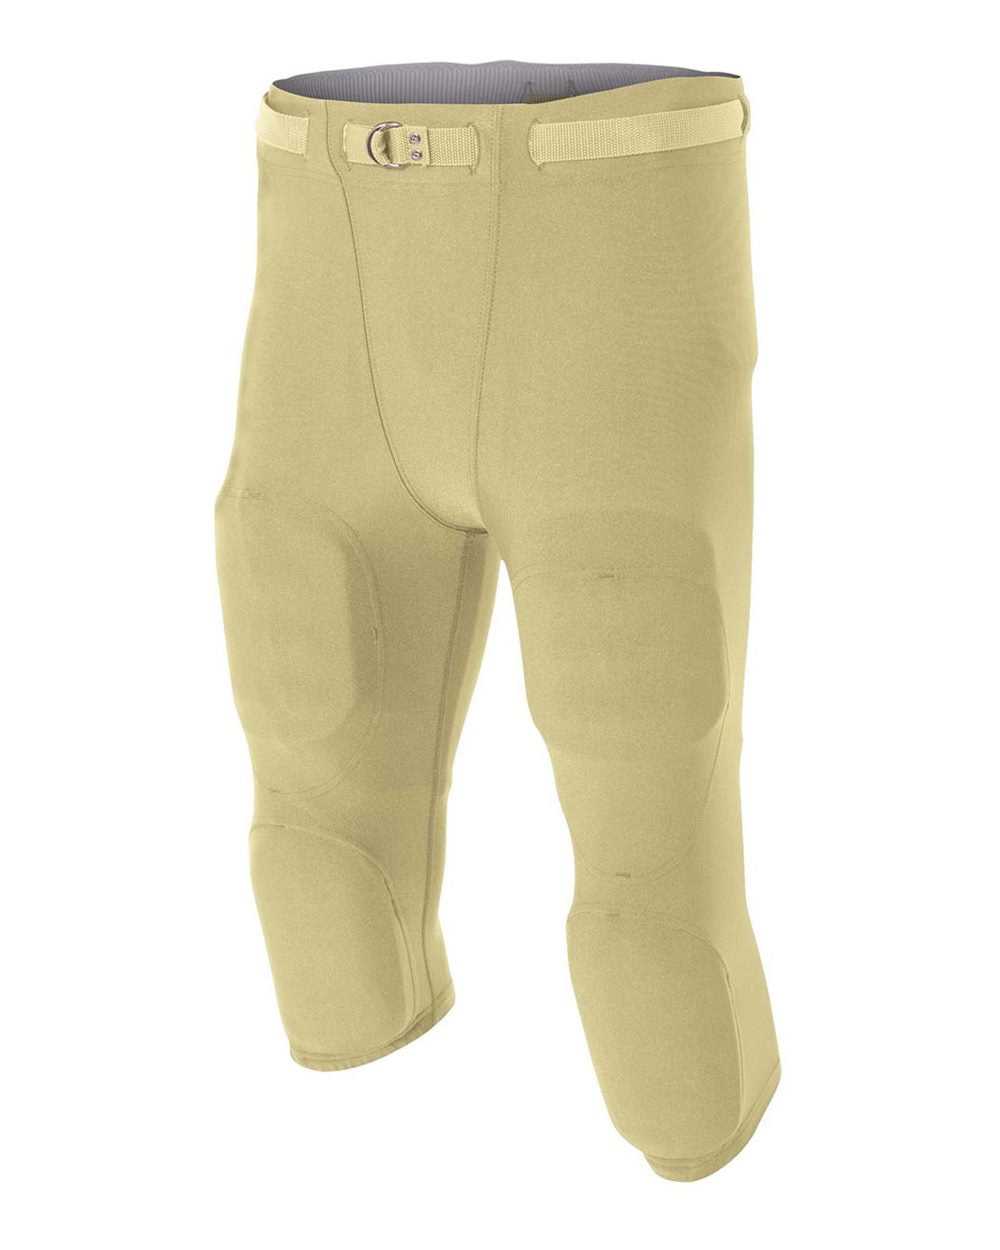 A4 N6181 Men's Flyless Football Pant (Pads Not Included) - Vegas Gold - HIT a Double